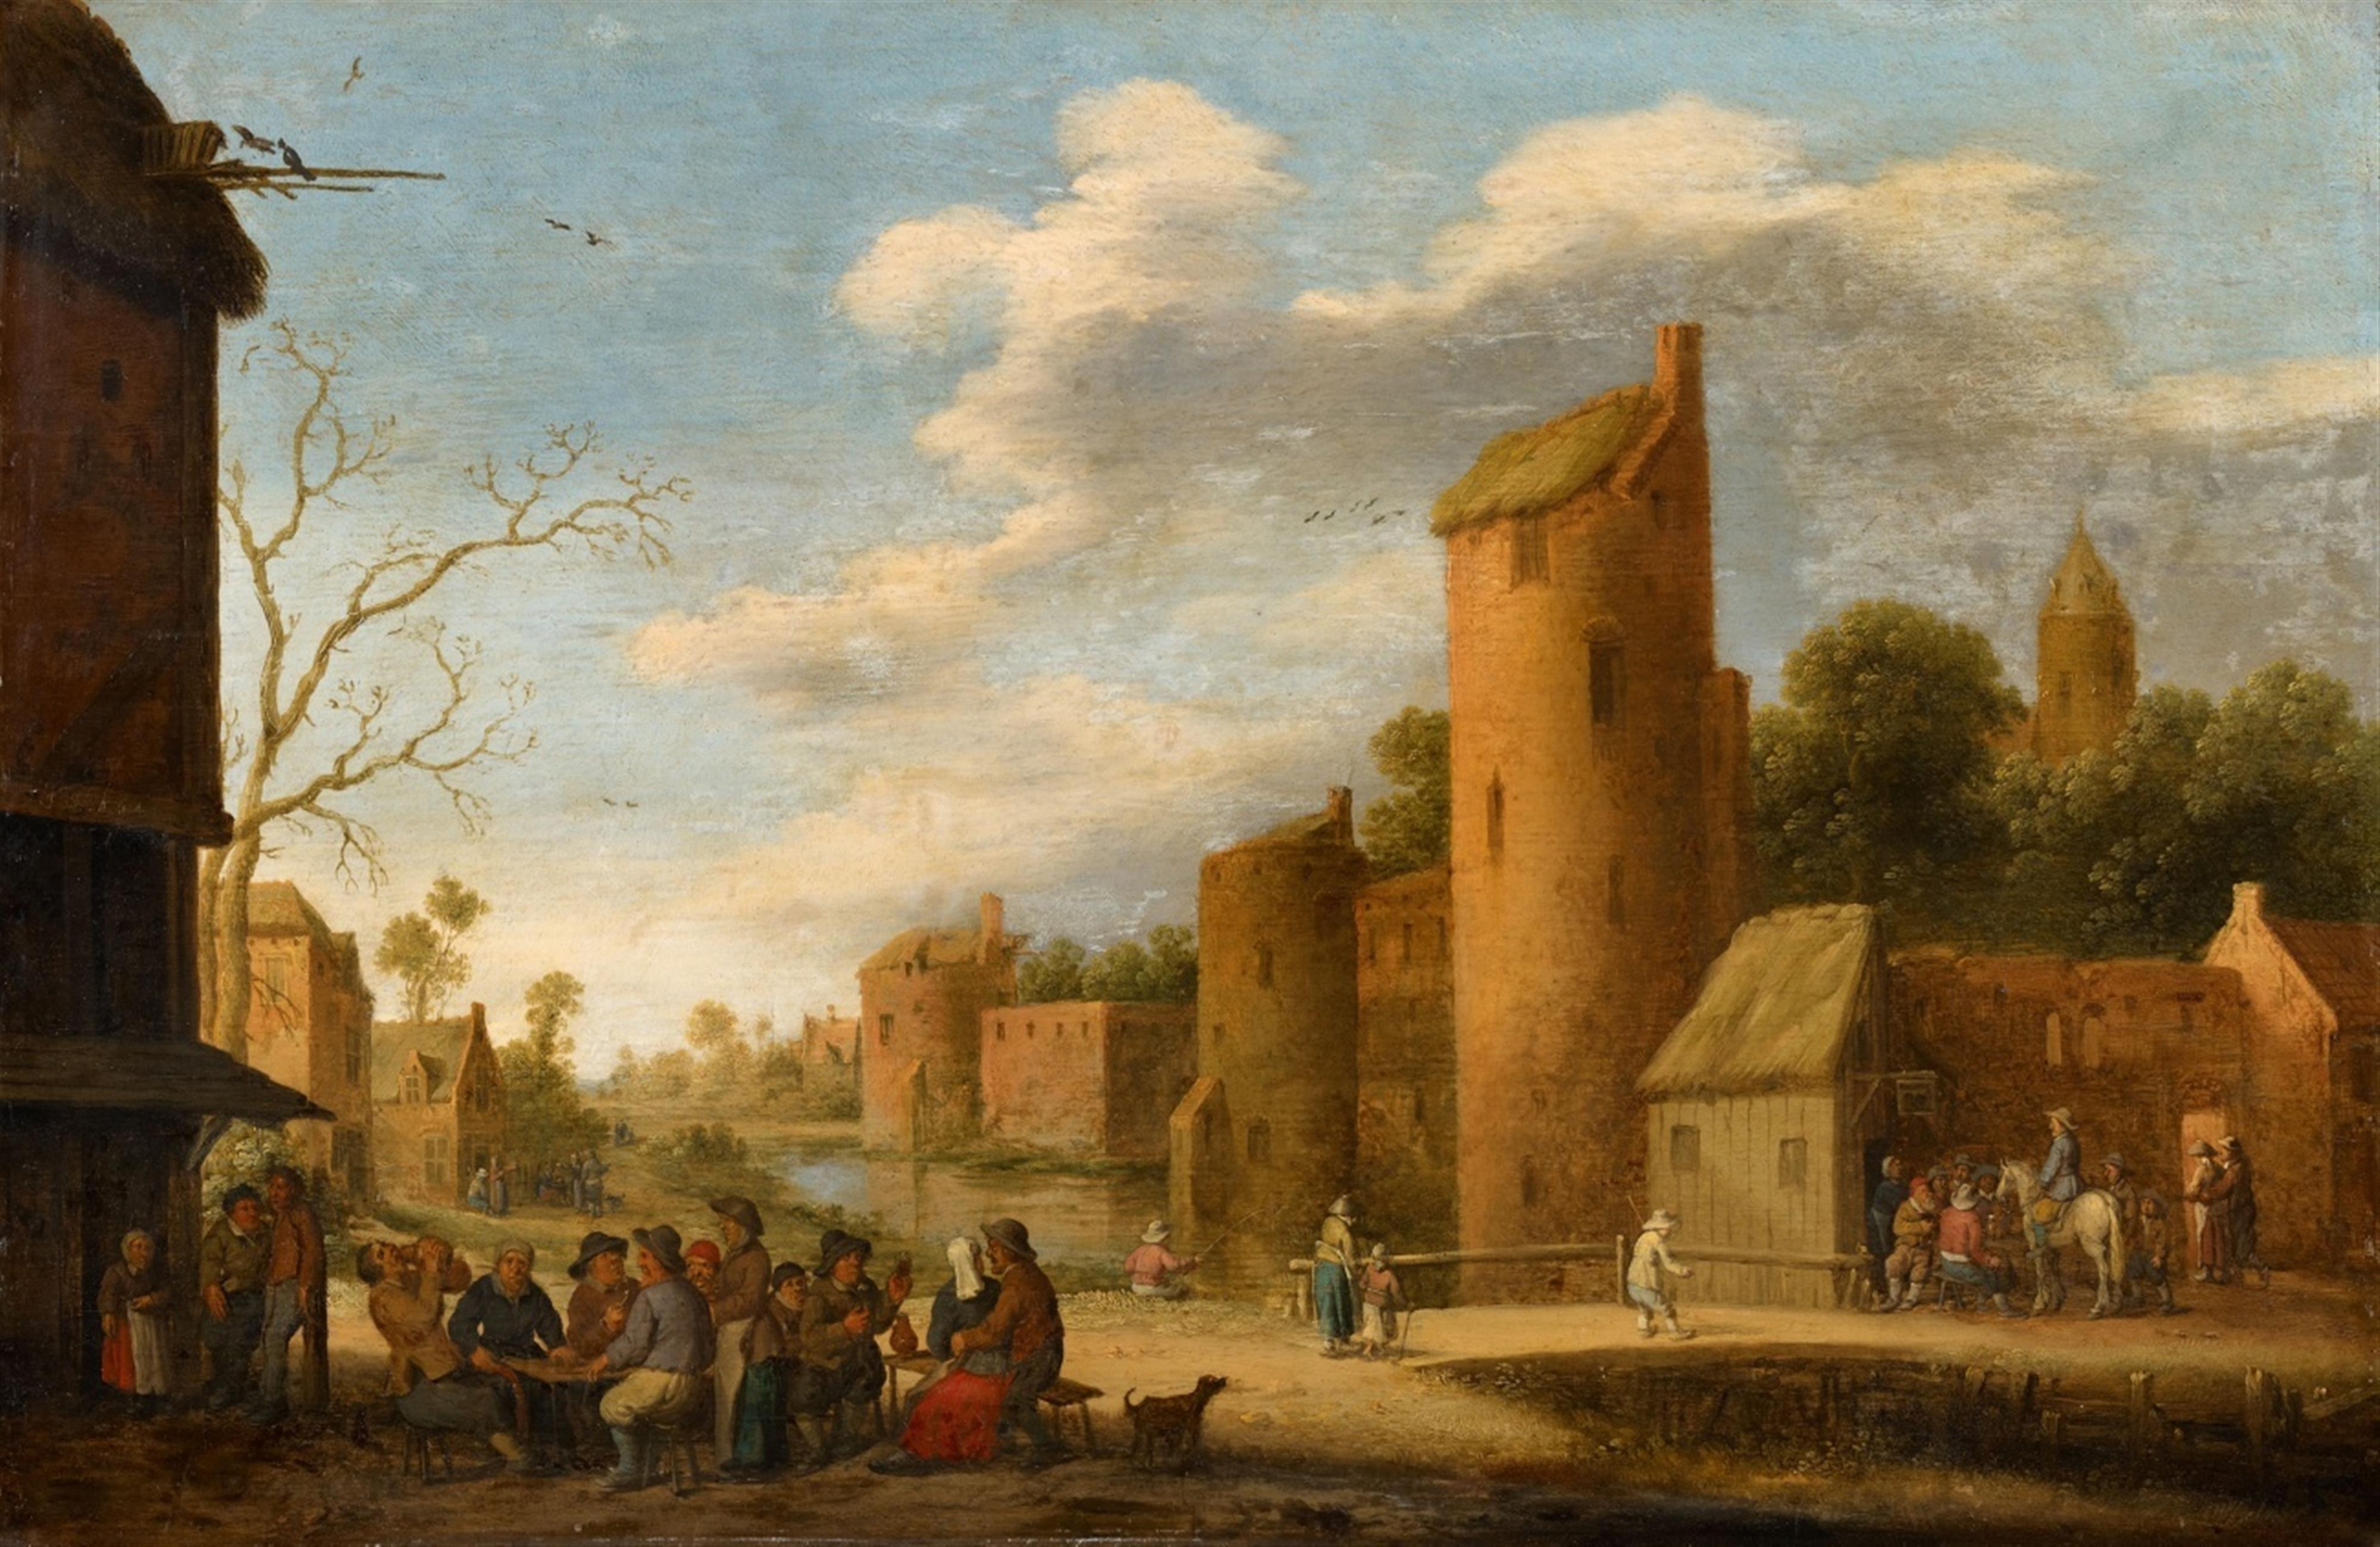 Joost Cornelisz. Droochsloot - Landscape with a Fortified Town and Peasants by a Tavern - image-1